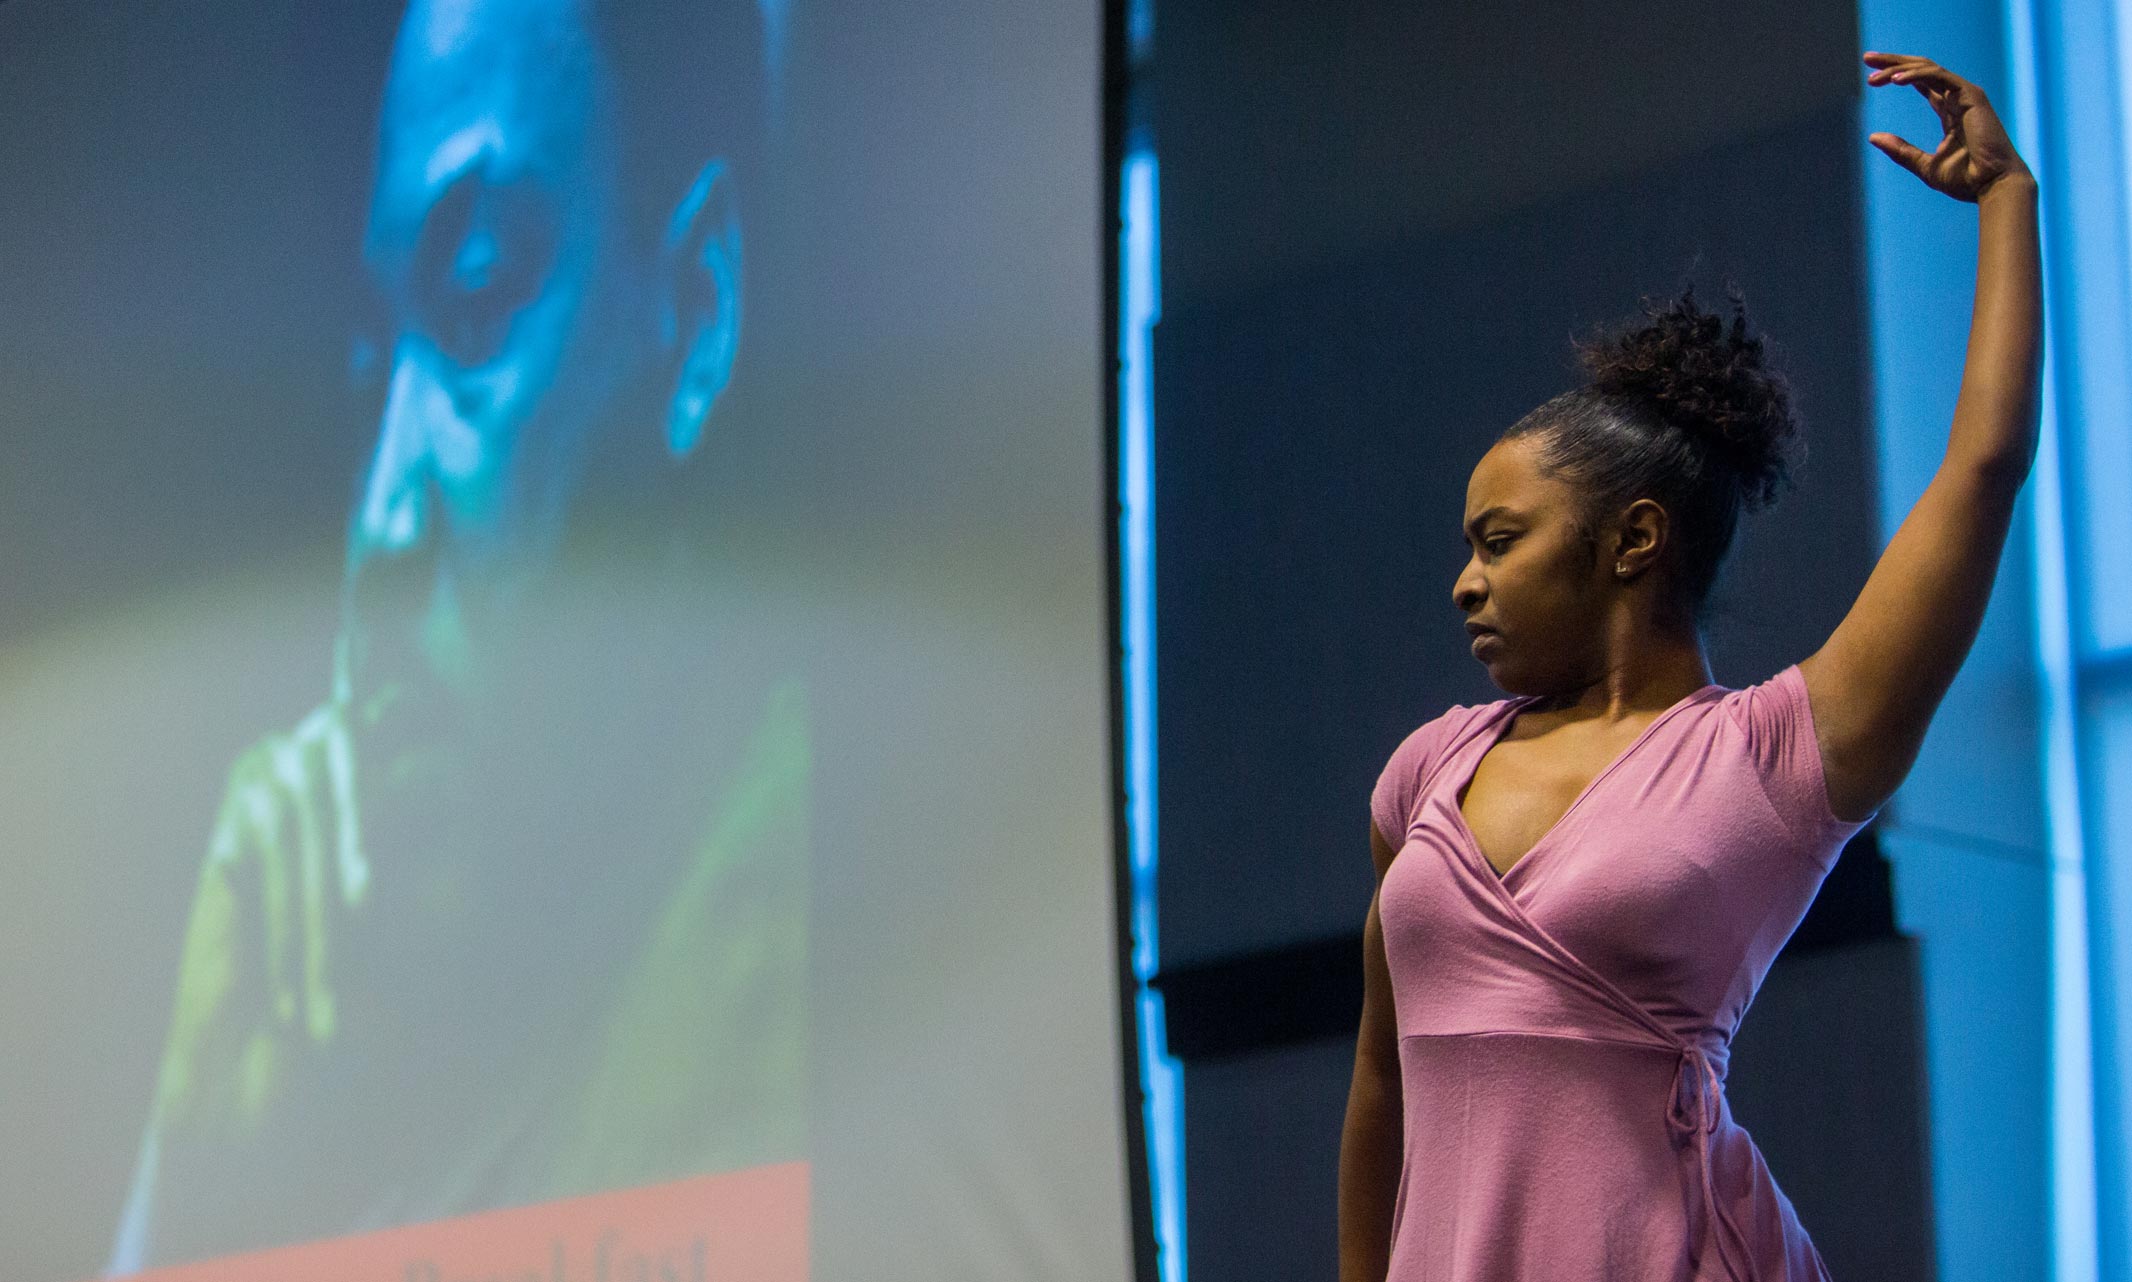 Black female student performs a dance on stage with a photo of Martin Luther King Jr. in the background during the TAASU Freedom Breakfast